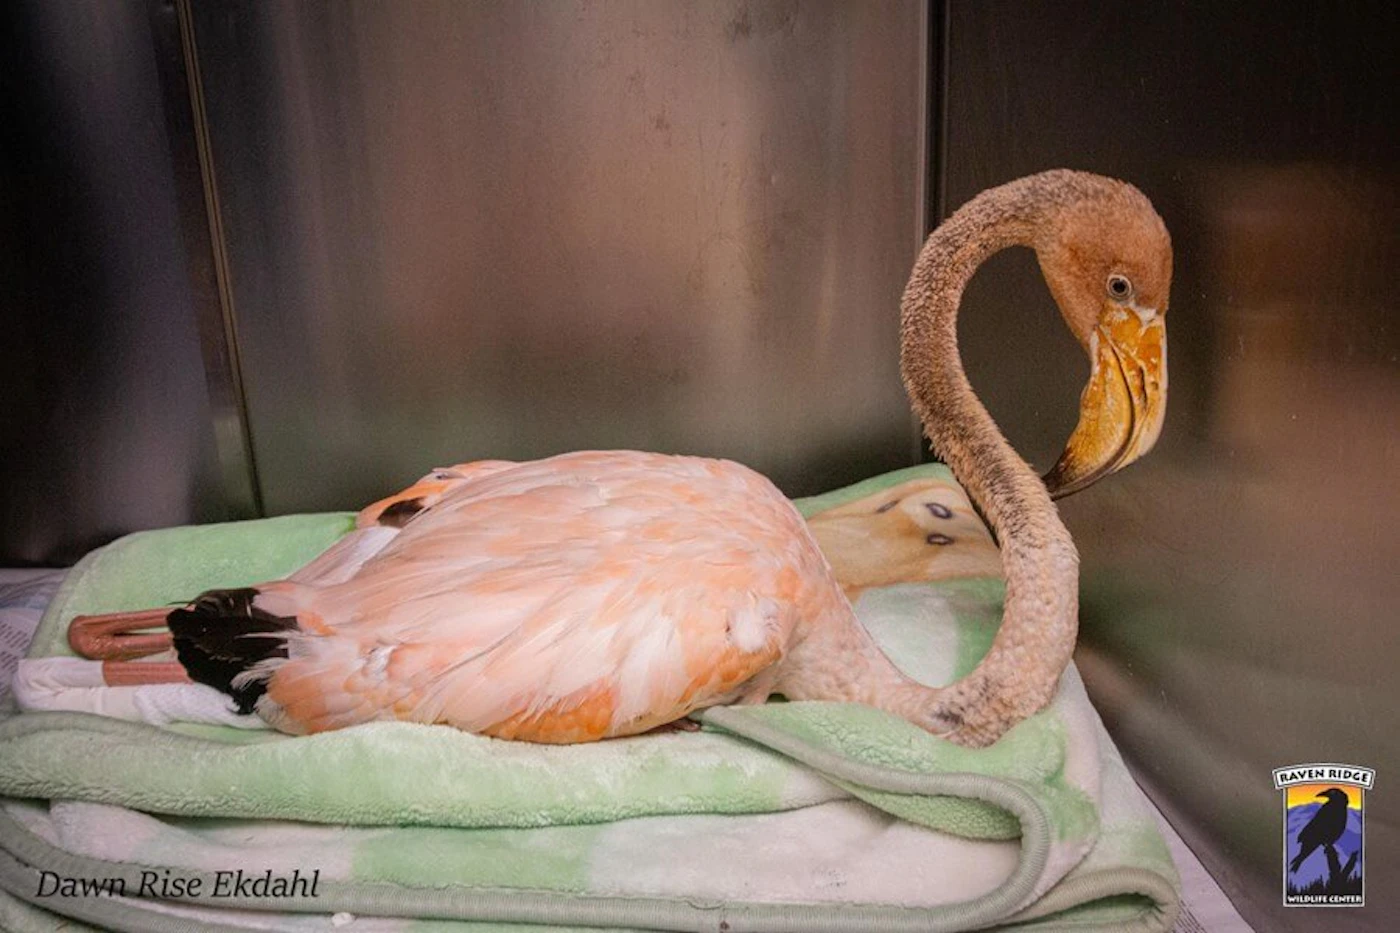 This flamingo was injured by a snapping turtle in St. Thomas, Franklin County, on Sept. 11, 2023. (Photo: Courtesy Raven Ridge Wildlife Center)